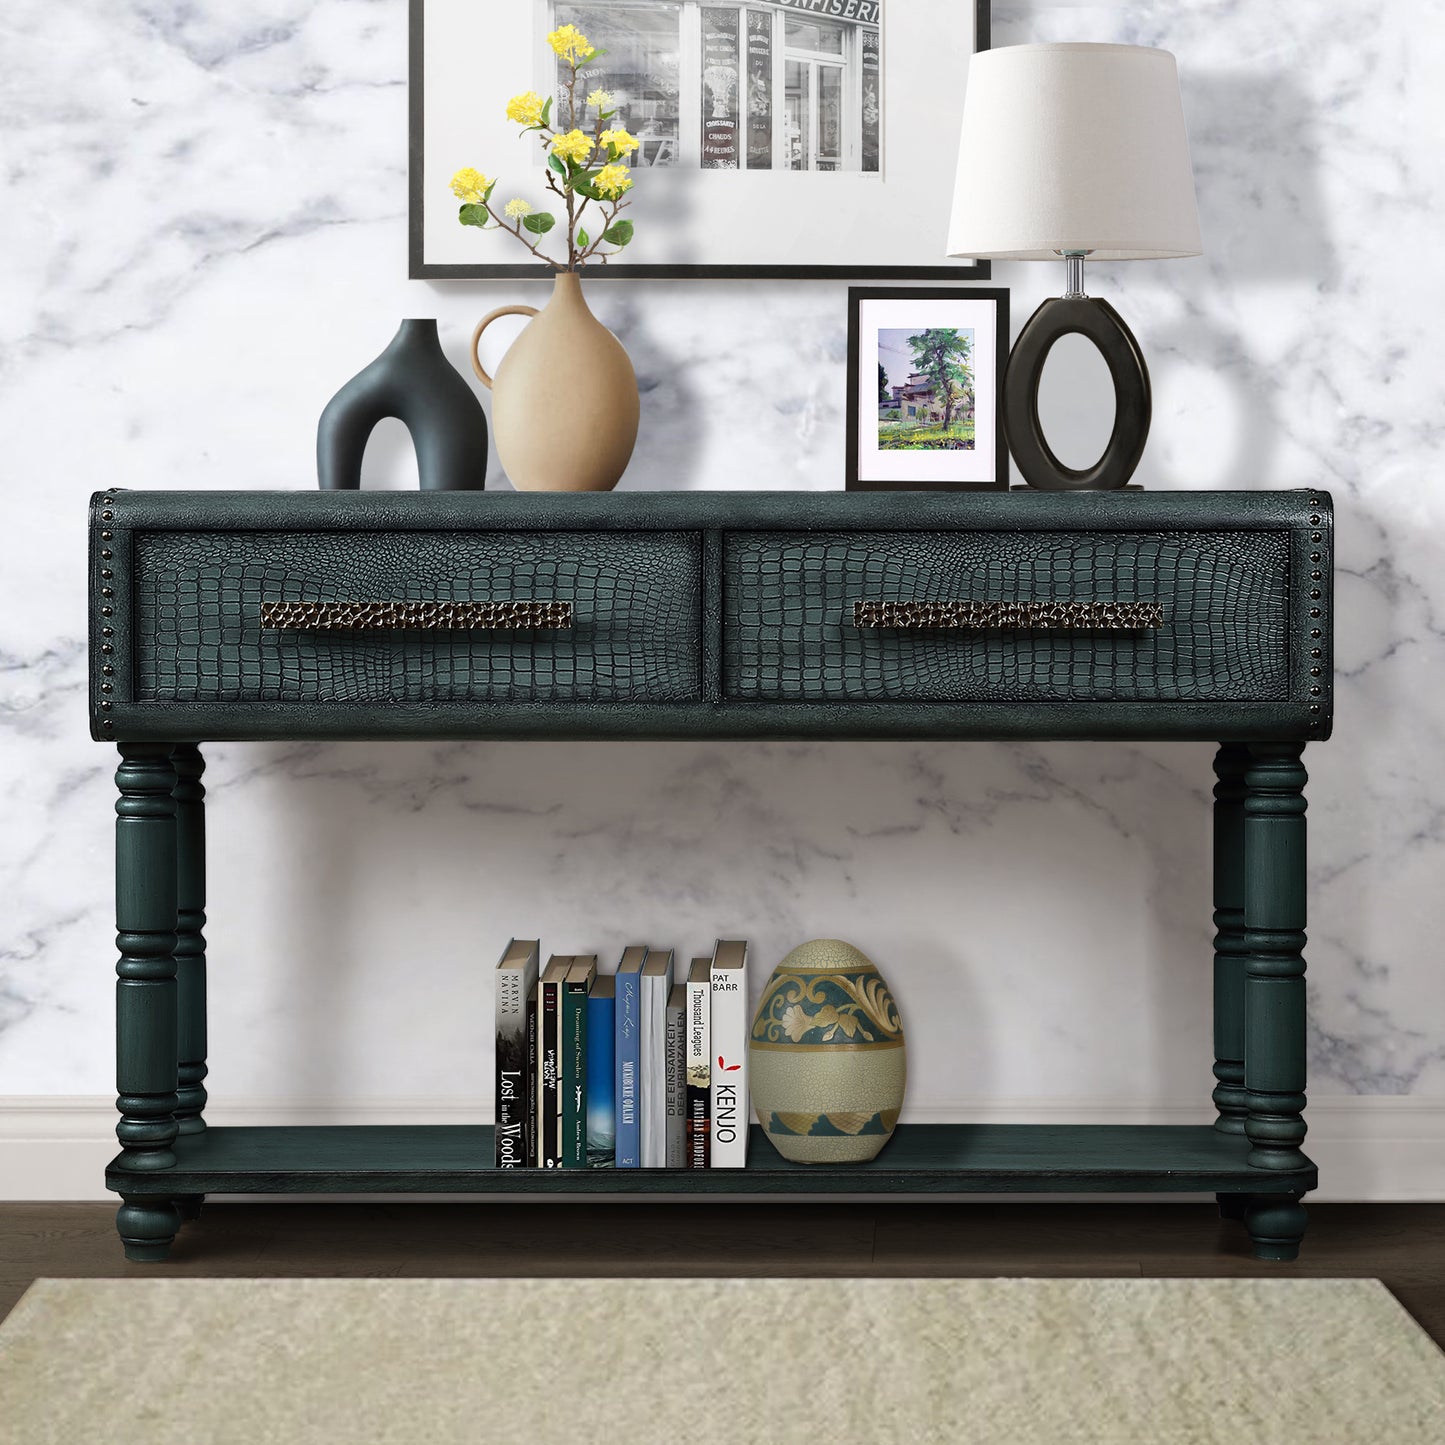 Pine Wood Crocodile Skin Sofa Console Table (2 Power Outlets + 2 USB Ports) Antique Green